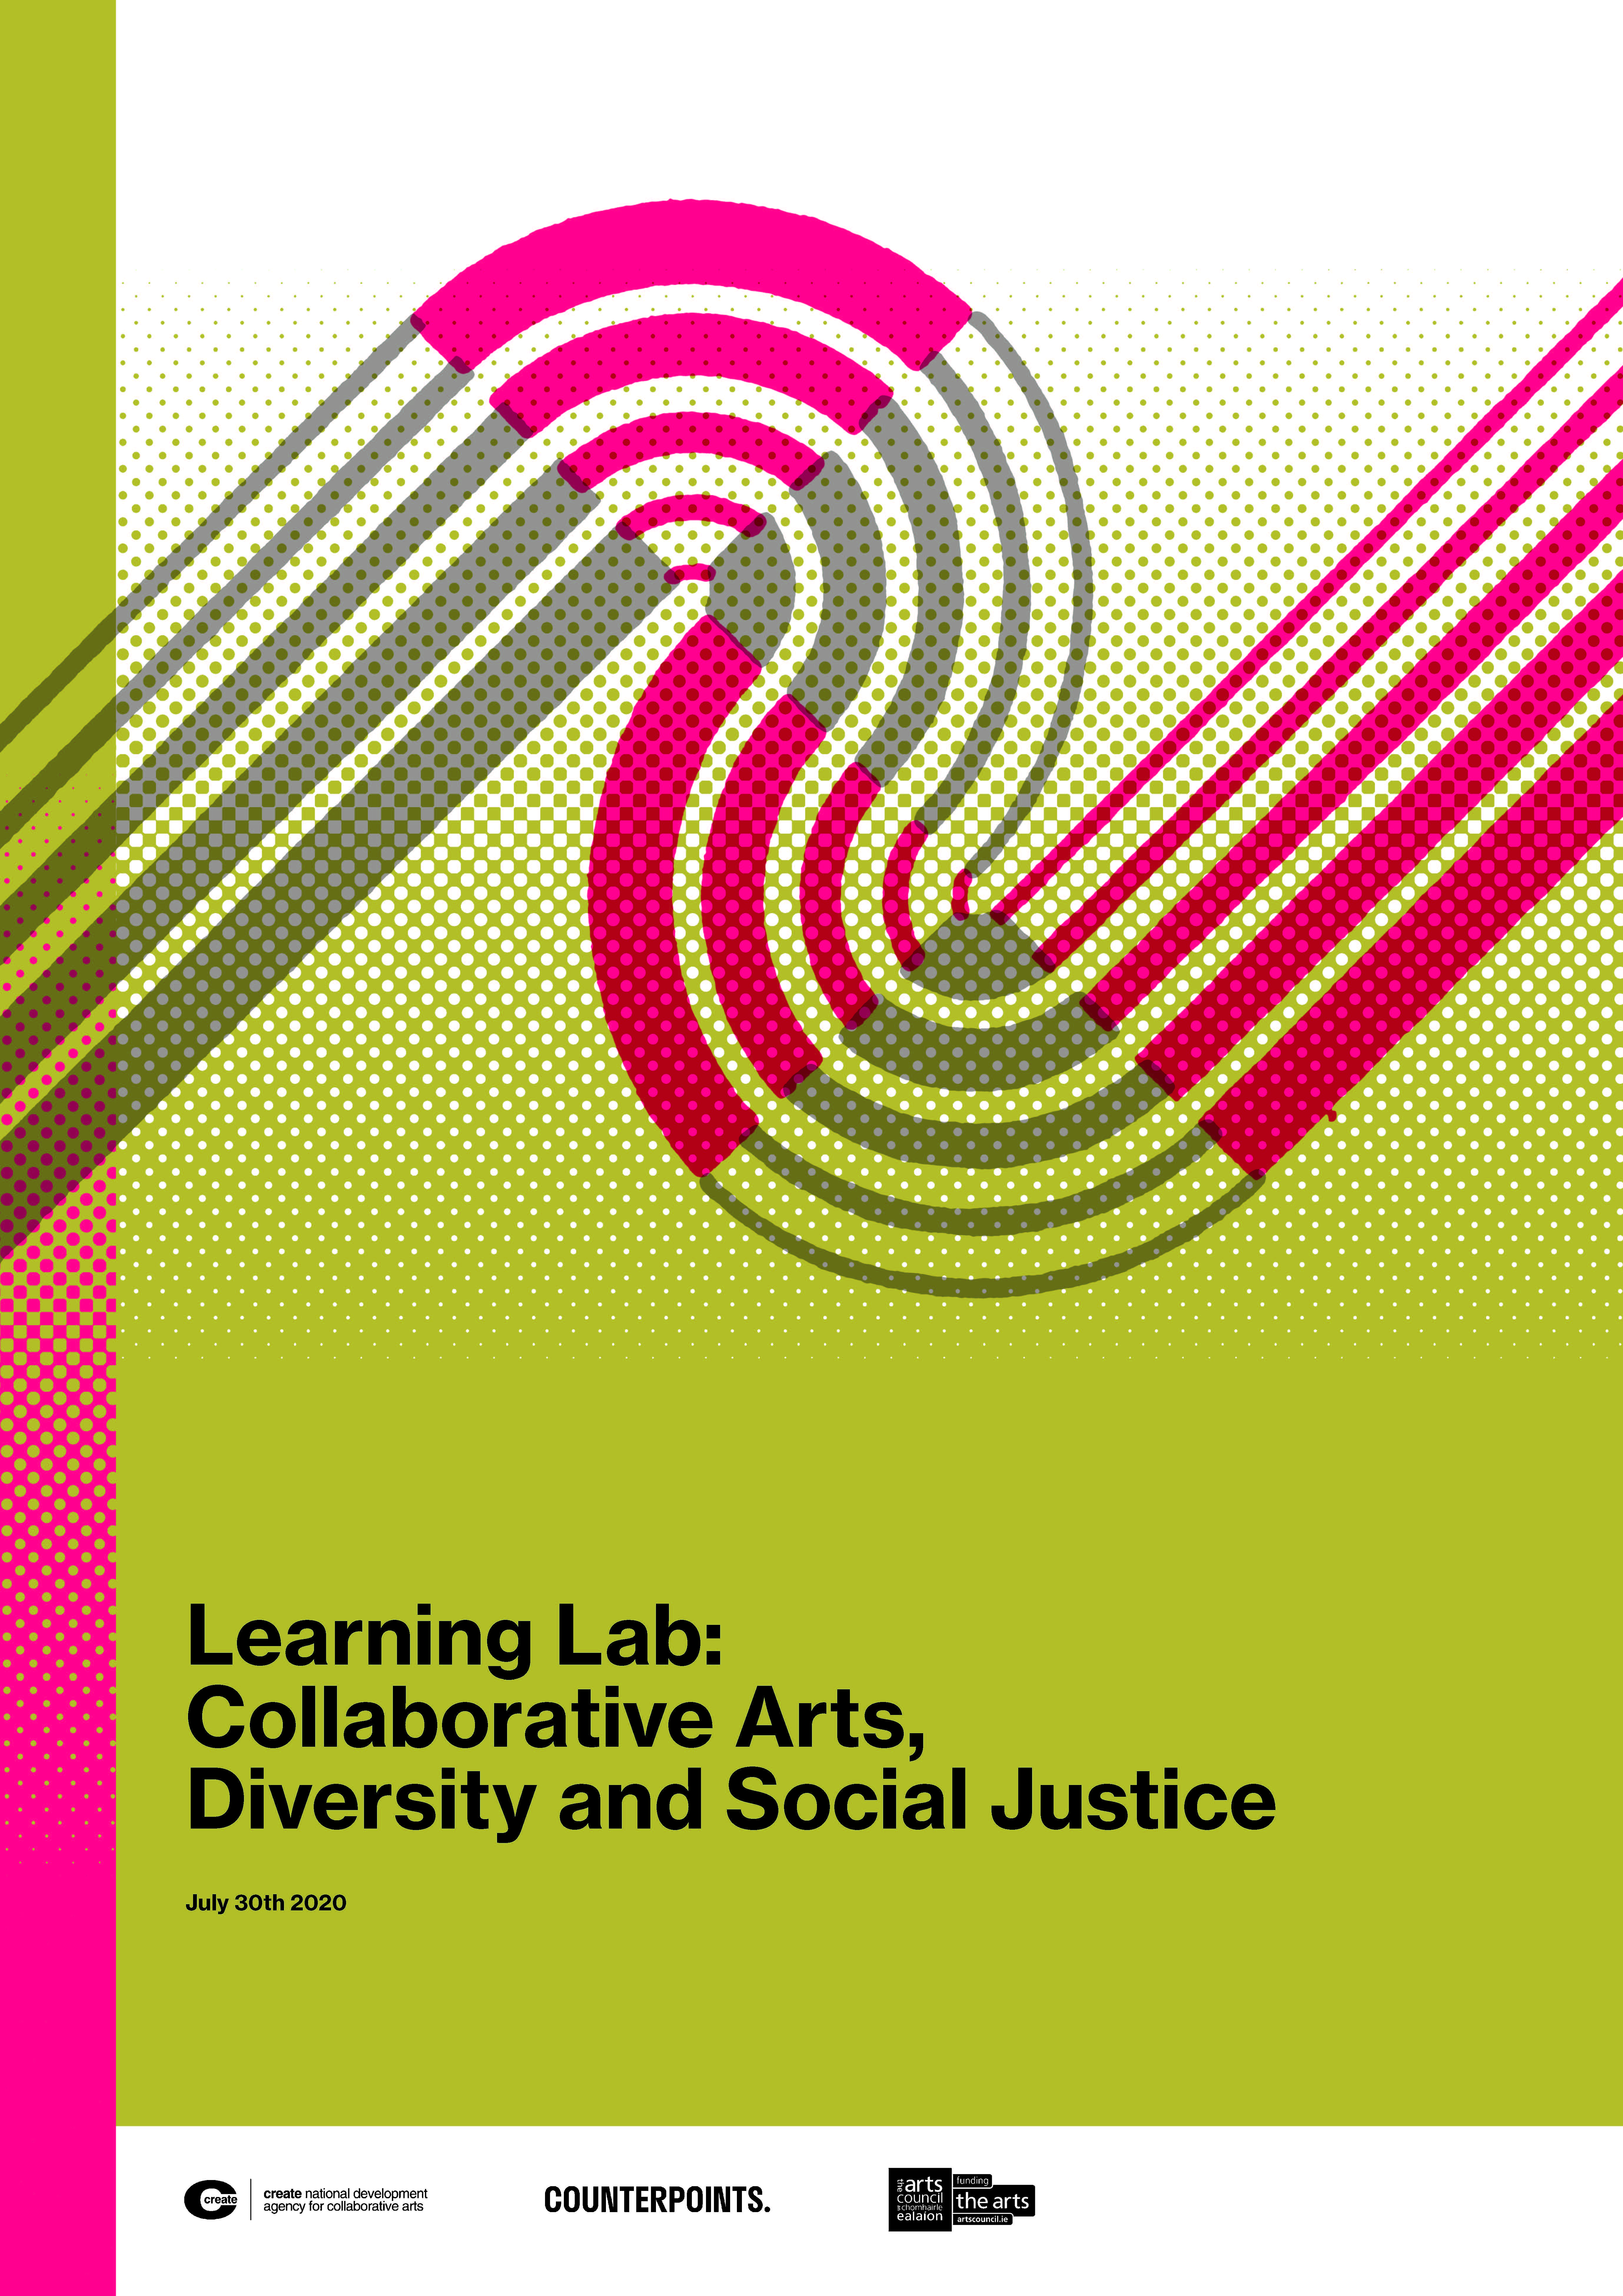 Create and Counterpoints Arts’ Learning Lab on Collaborative Arts, Diversity and Social Justice Report.